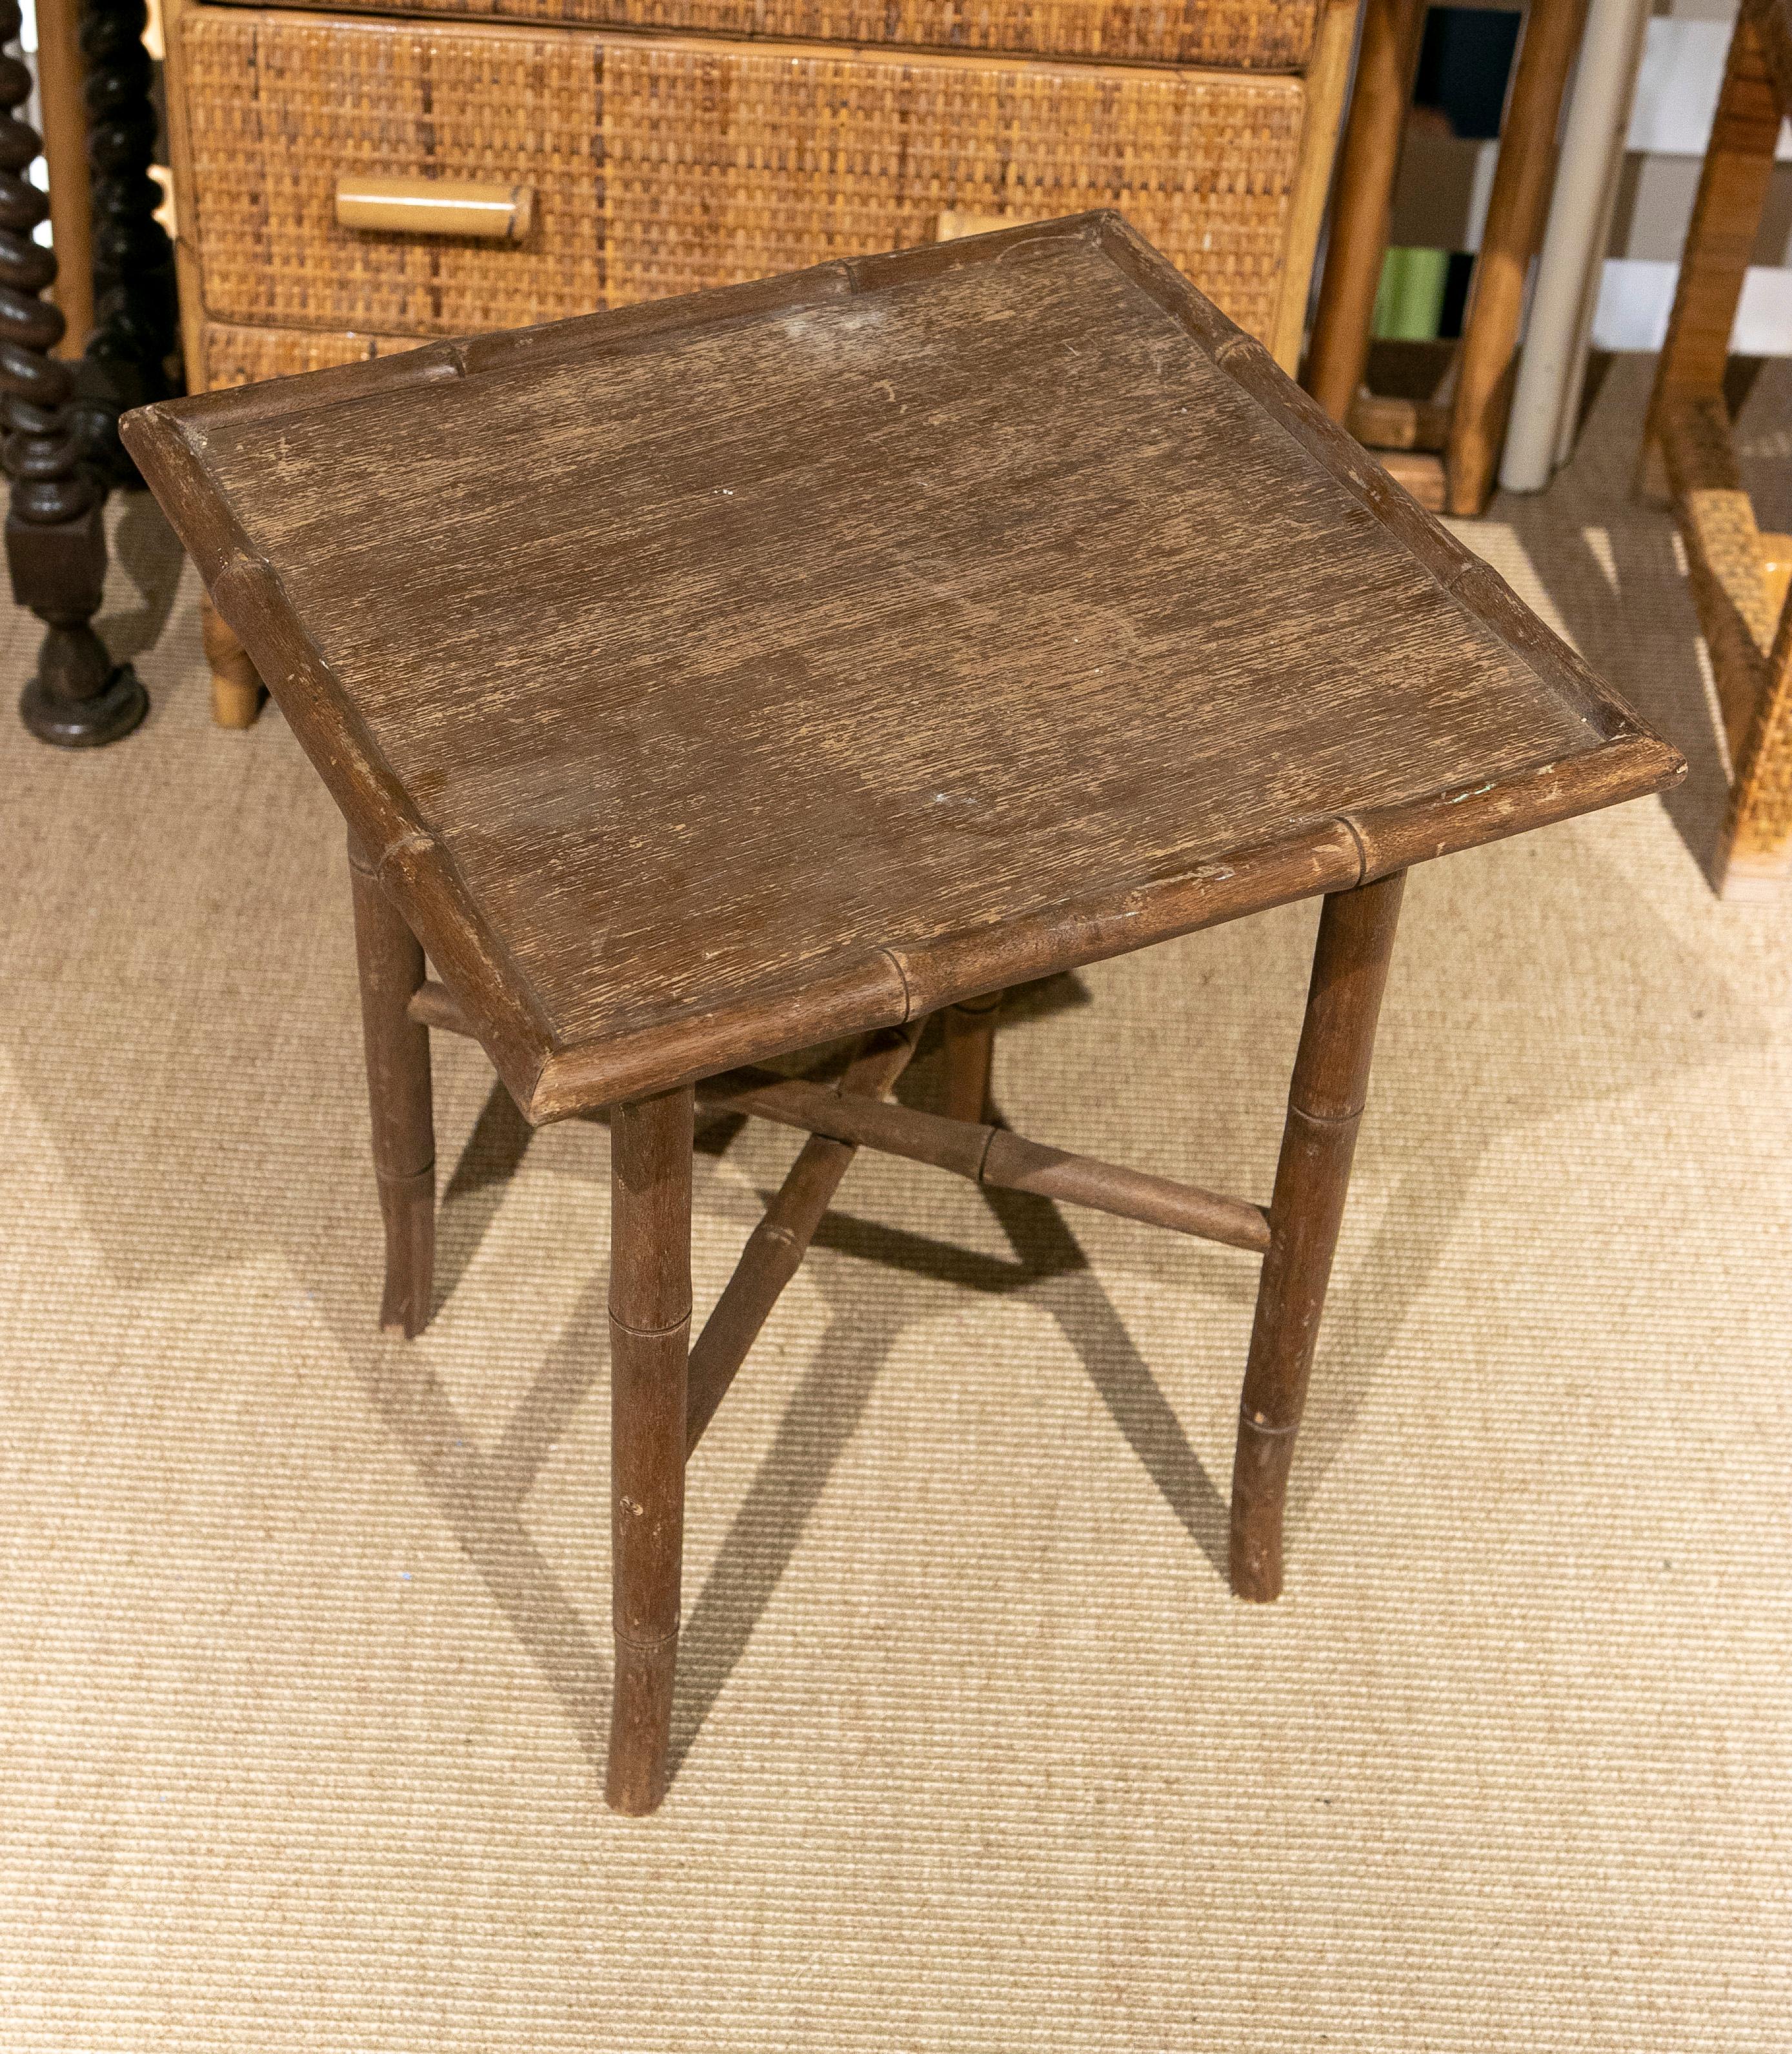 20th Century 1970s Bamboo Imitation Wooden Side Table with Wooden Top For Sale